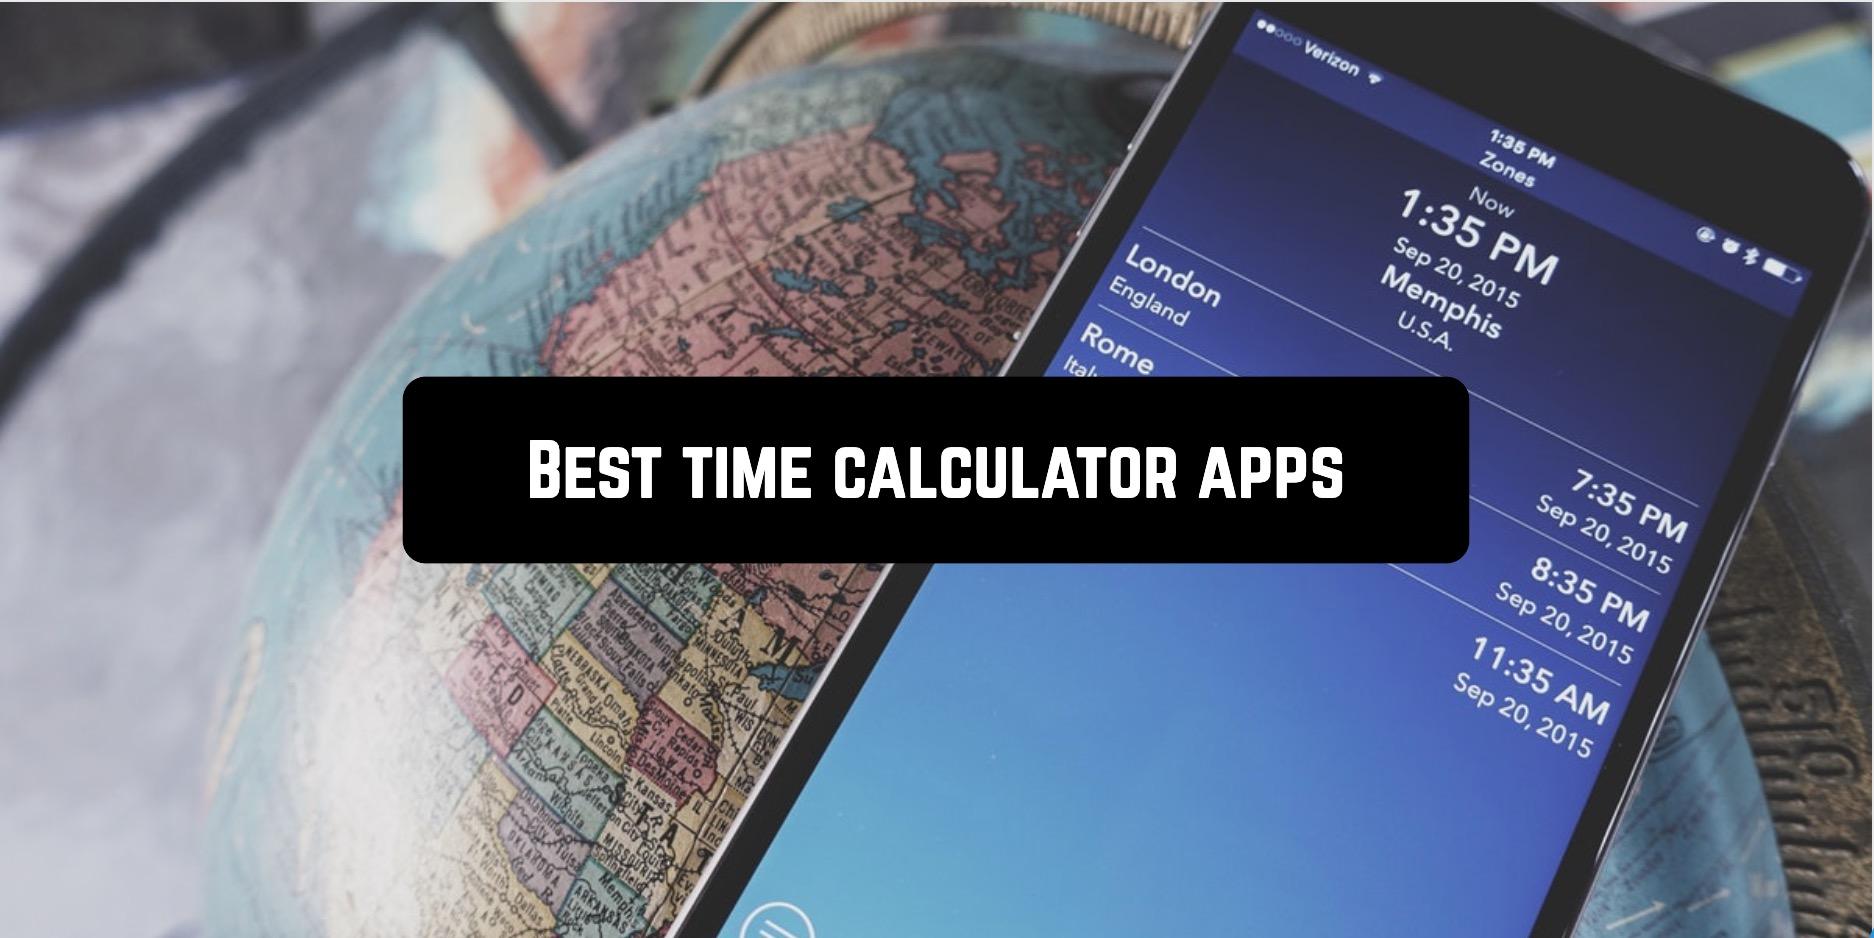 Best time calculator apps